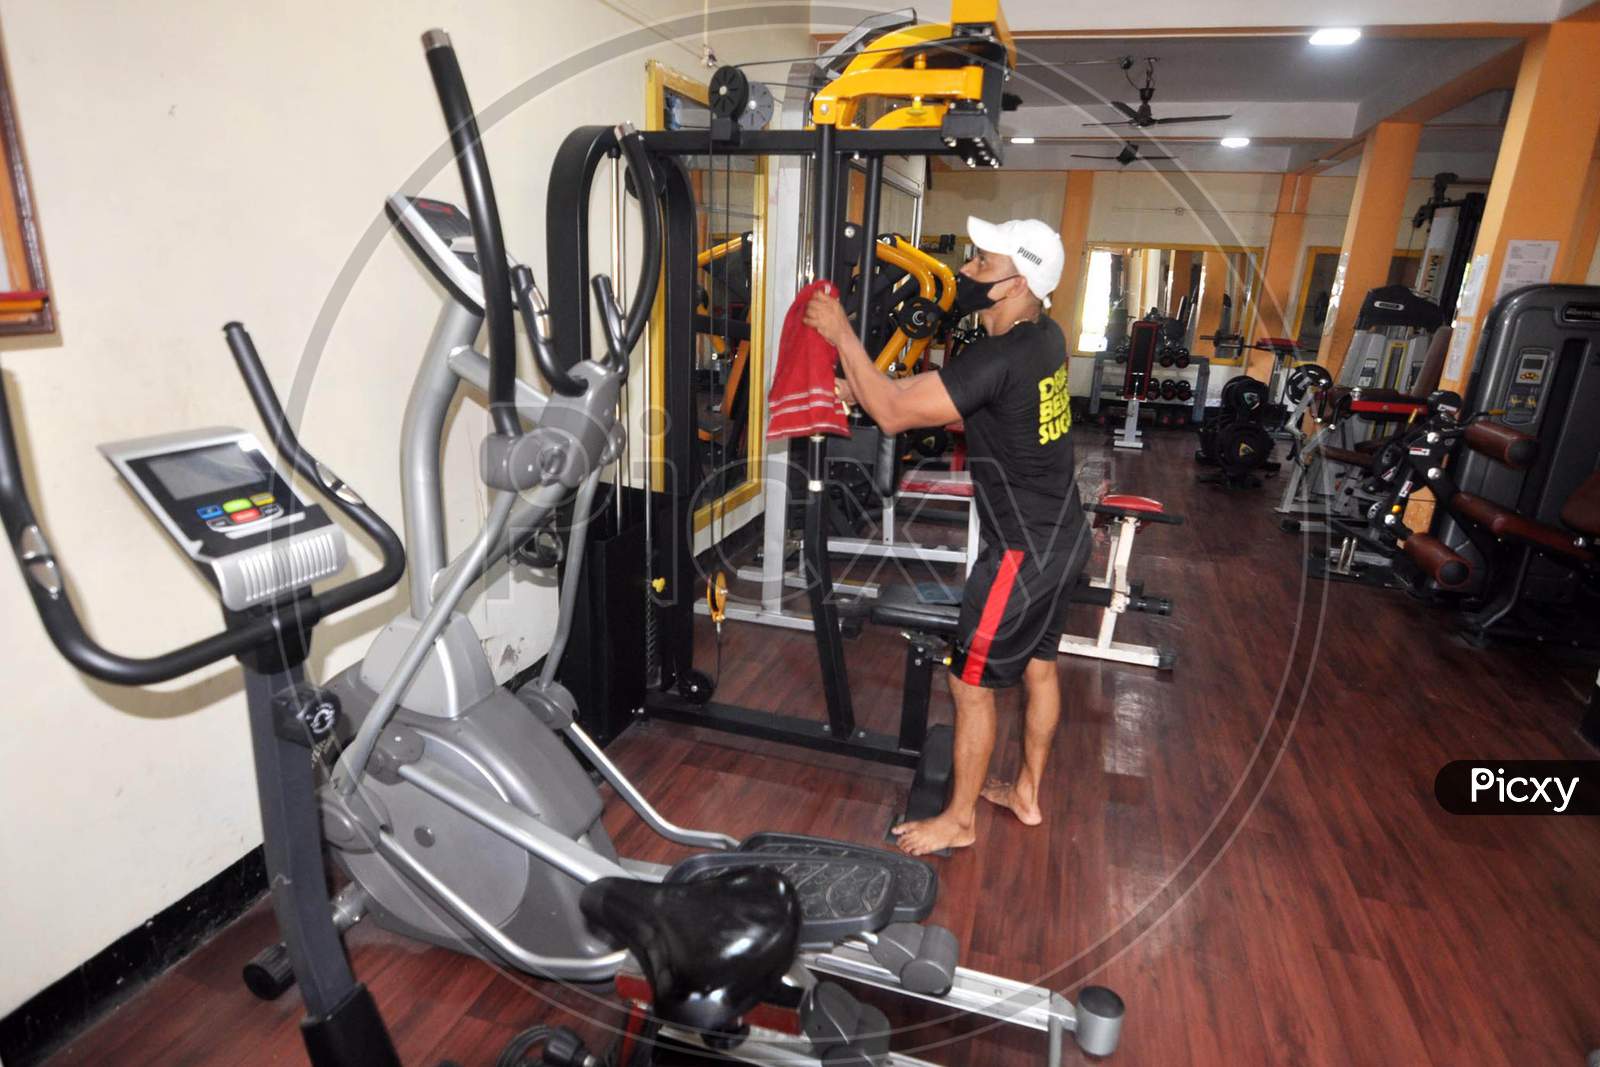 A Gym Instructor Sanitizes A Gym Before Its Reopening After Authorities Eased Lockdown Restrictions That Were Imposed To Slow The Spread Of The Coronavirus Disease (Covid-19), In Guwahati On August 3,2020